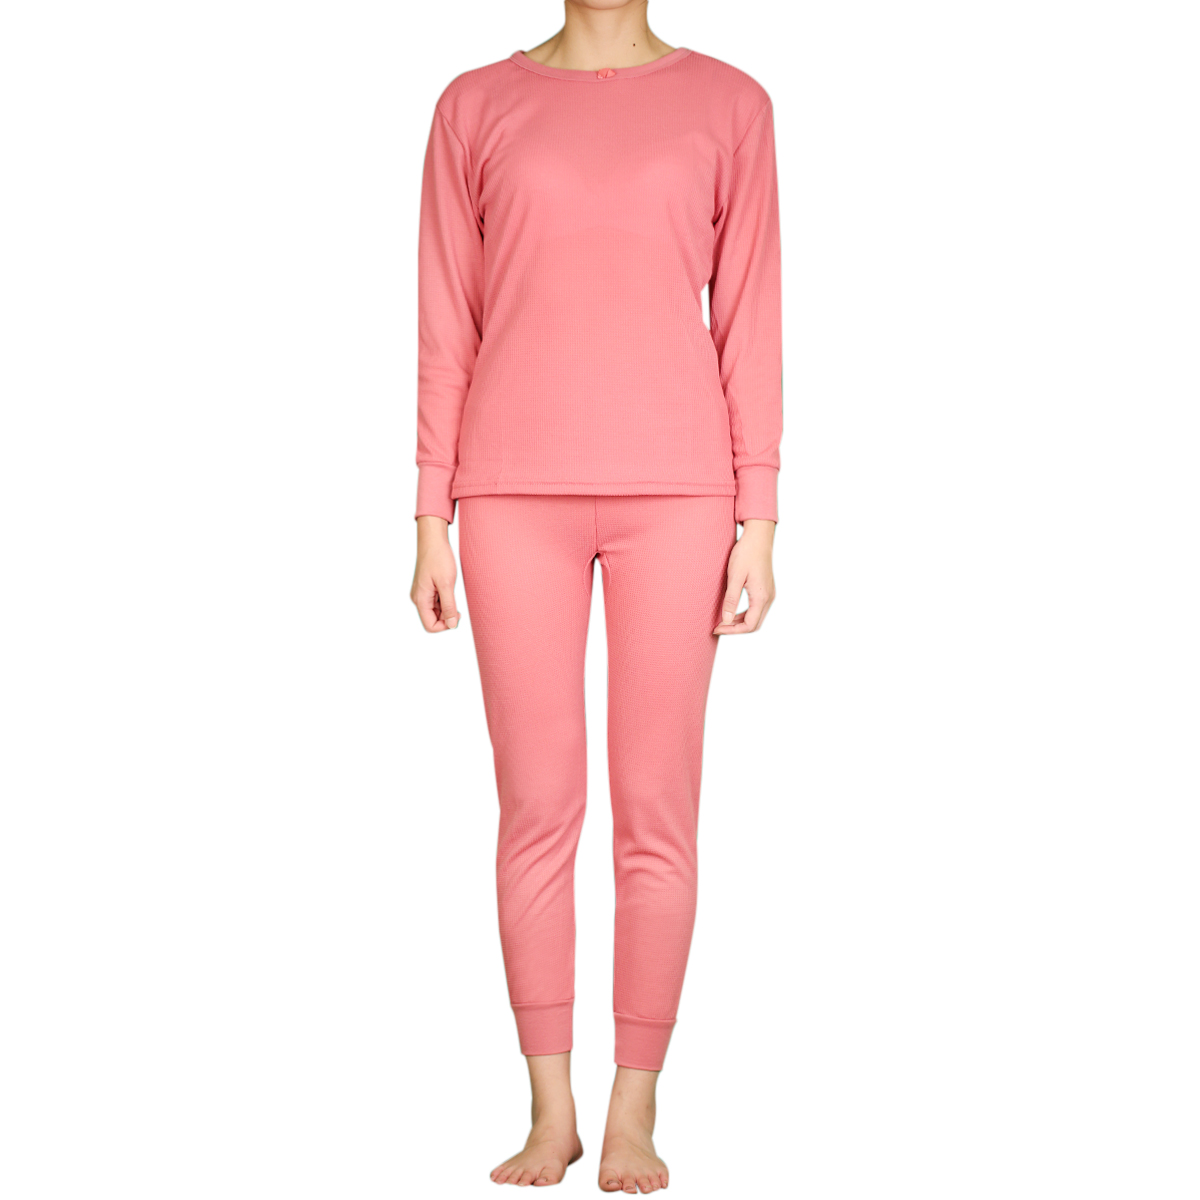 LAVRA Girl's Cotton Thermal Sets